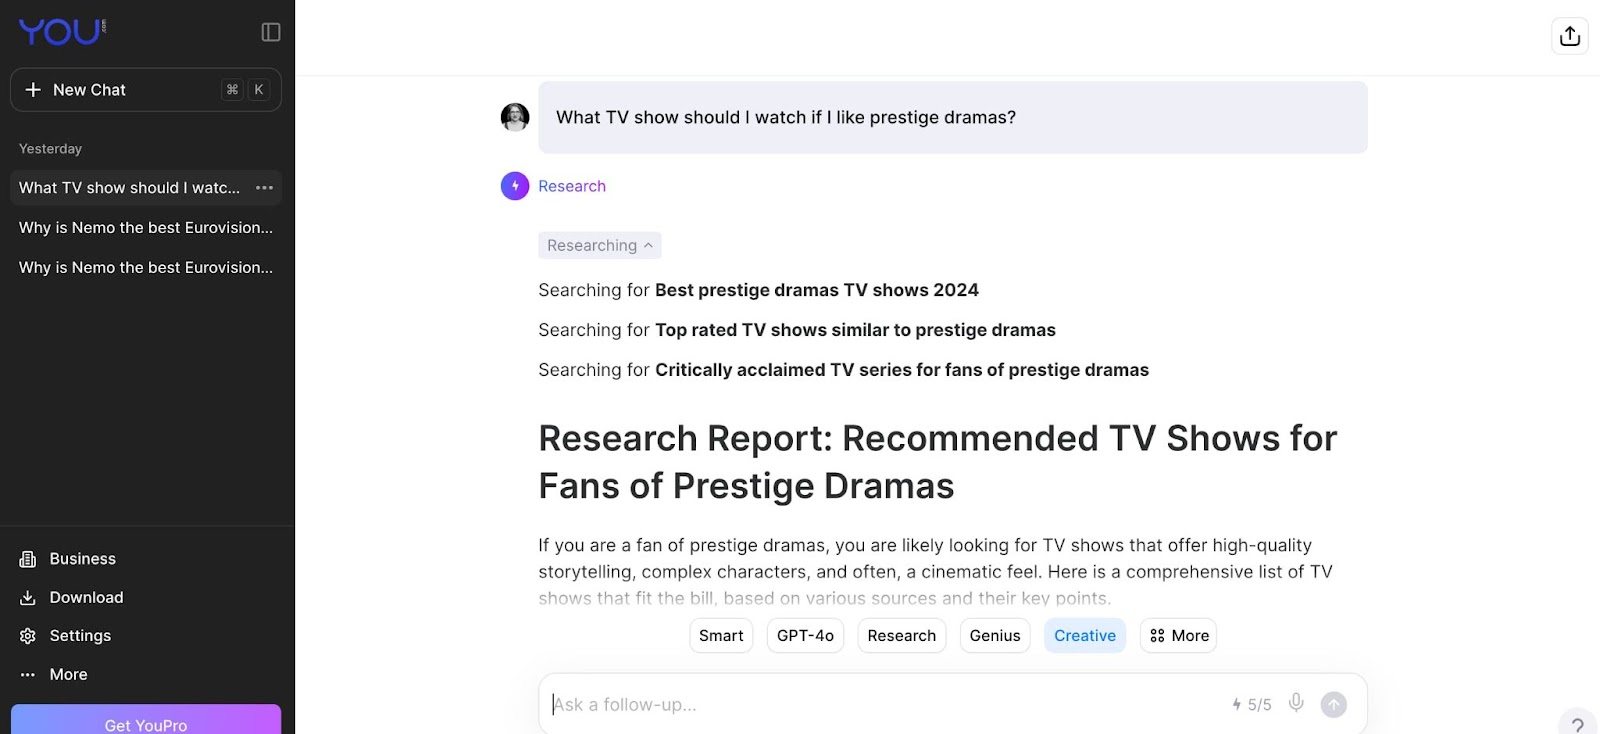 You.com search results page for “What TV show should I watch if I like prestige dramas?”